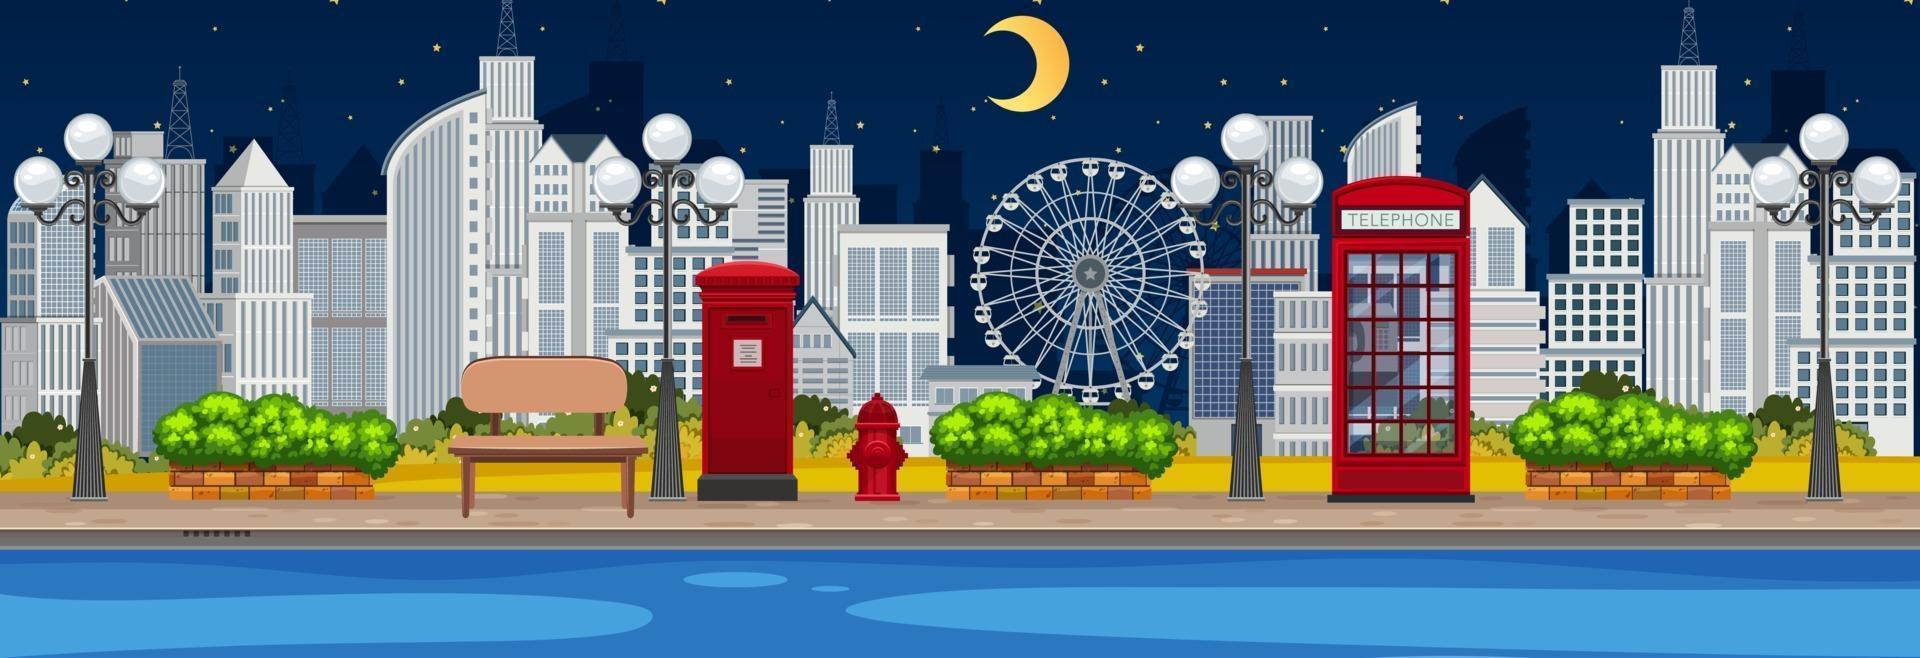 River park horizontal scene with cityscape background at night time vector